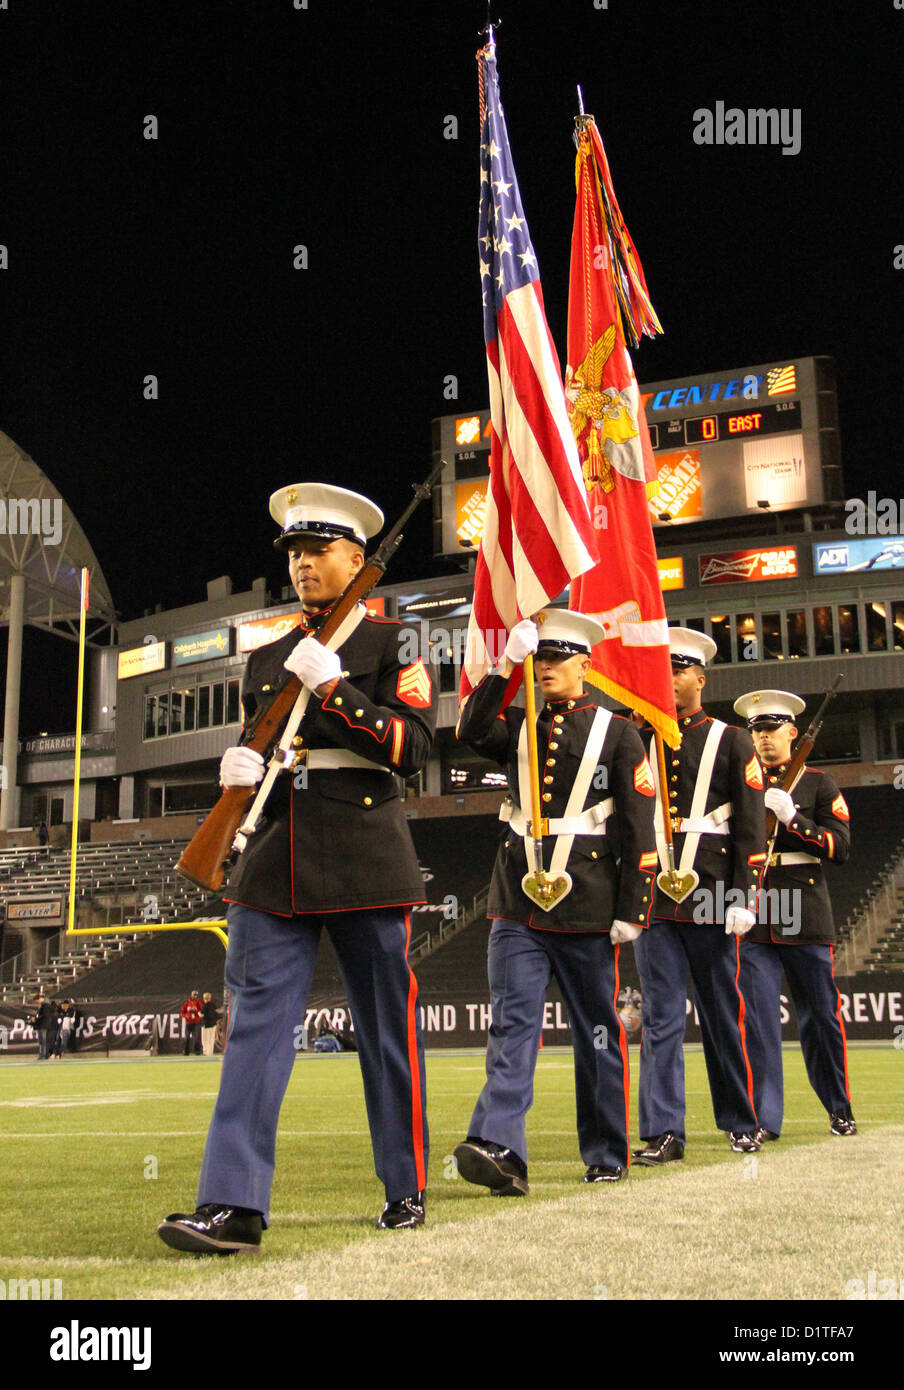 The 12th Marine Corps District color guard marches onto the field to prepare for the presentation of the United States and Marine Corps flag during the Semper Fidelis All-American Bowl, Jan. 4, 2013 at the Home Depot Center, Carson, Calif. The Semper Fidelis All-American Bowl is the culmination of the Marine Corps Semper Fidelis' Football Program, through which the Marine Corps purposefully engages with well-rounded student athletes to share leadership lessons that will enable future successes in their academic and athletic careers. (U.S. Marine Corps photo by Cpl. Jen S. Martinez)  (U.S. Mari Stock Photo